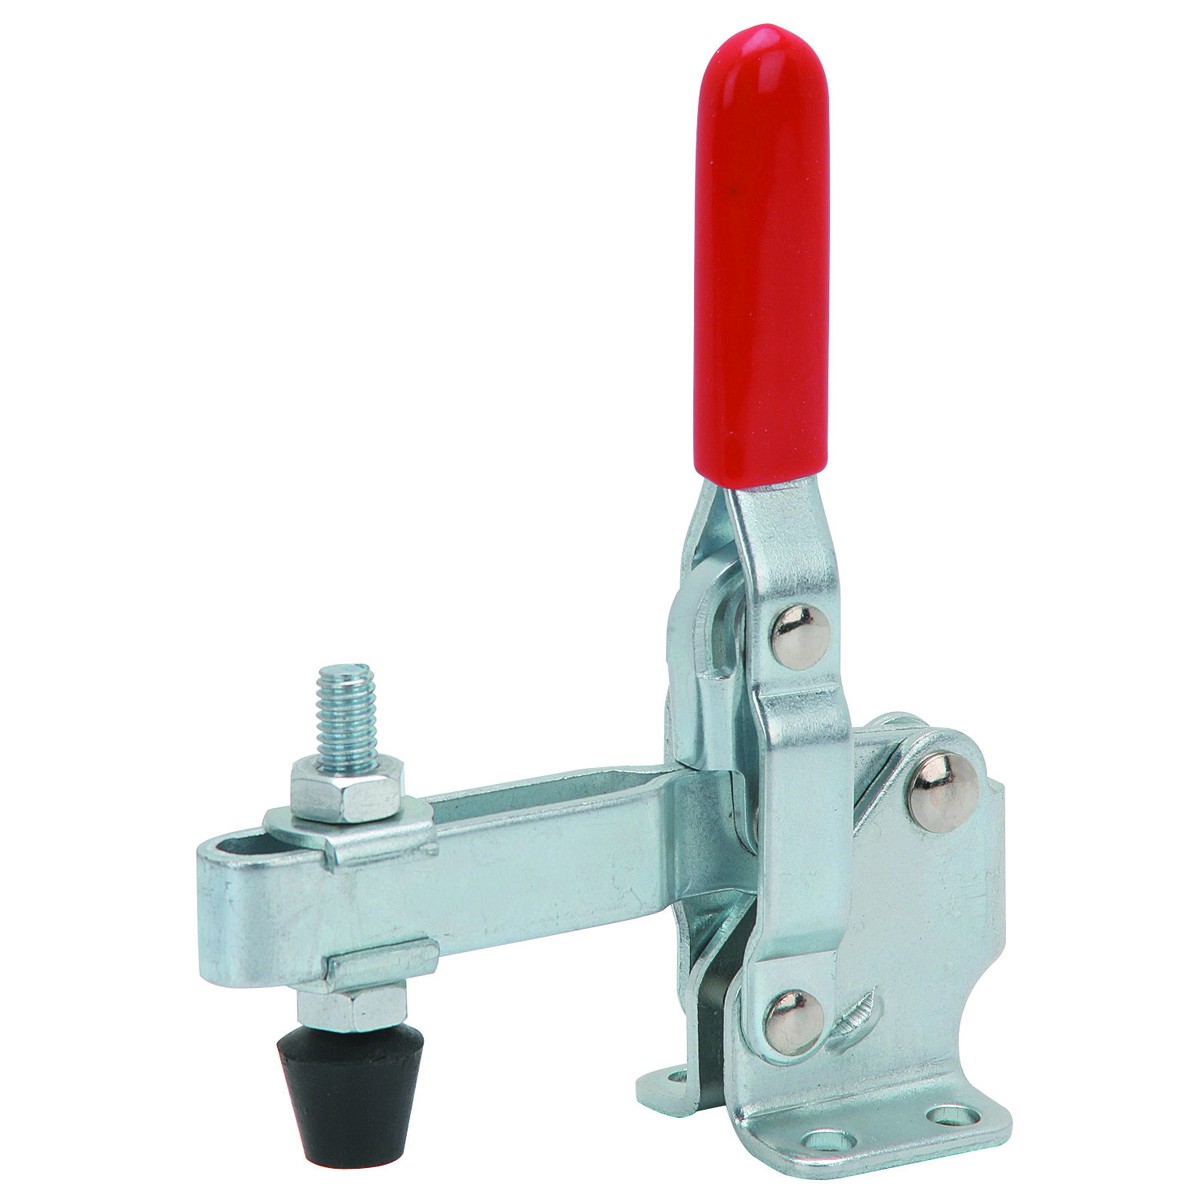 Vertical type hold down toggle clamp